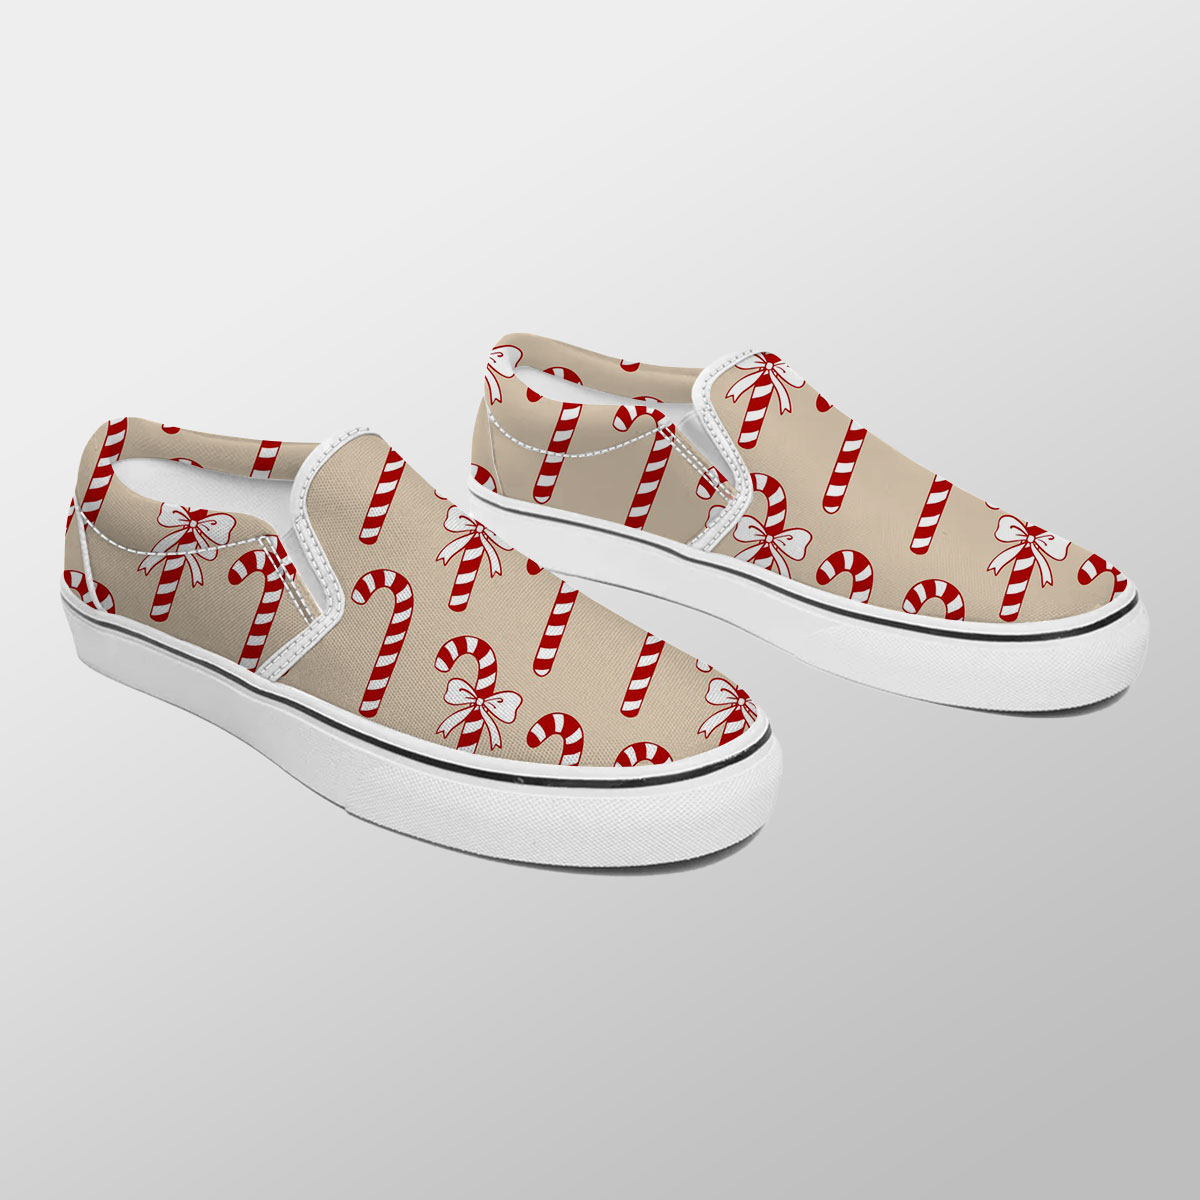 Candy Cane Beige Christmas Slip On Sneakers